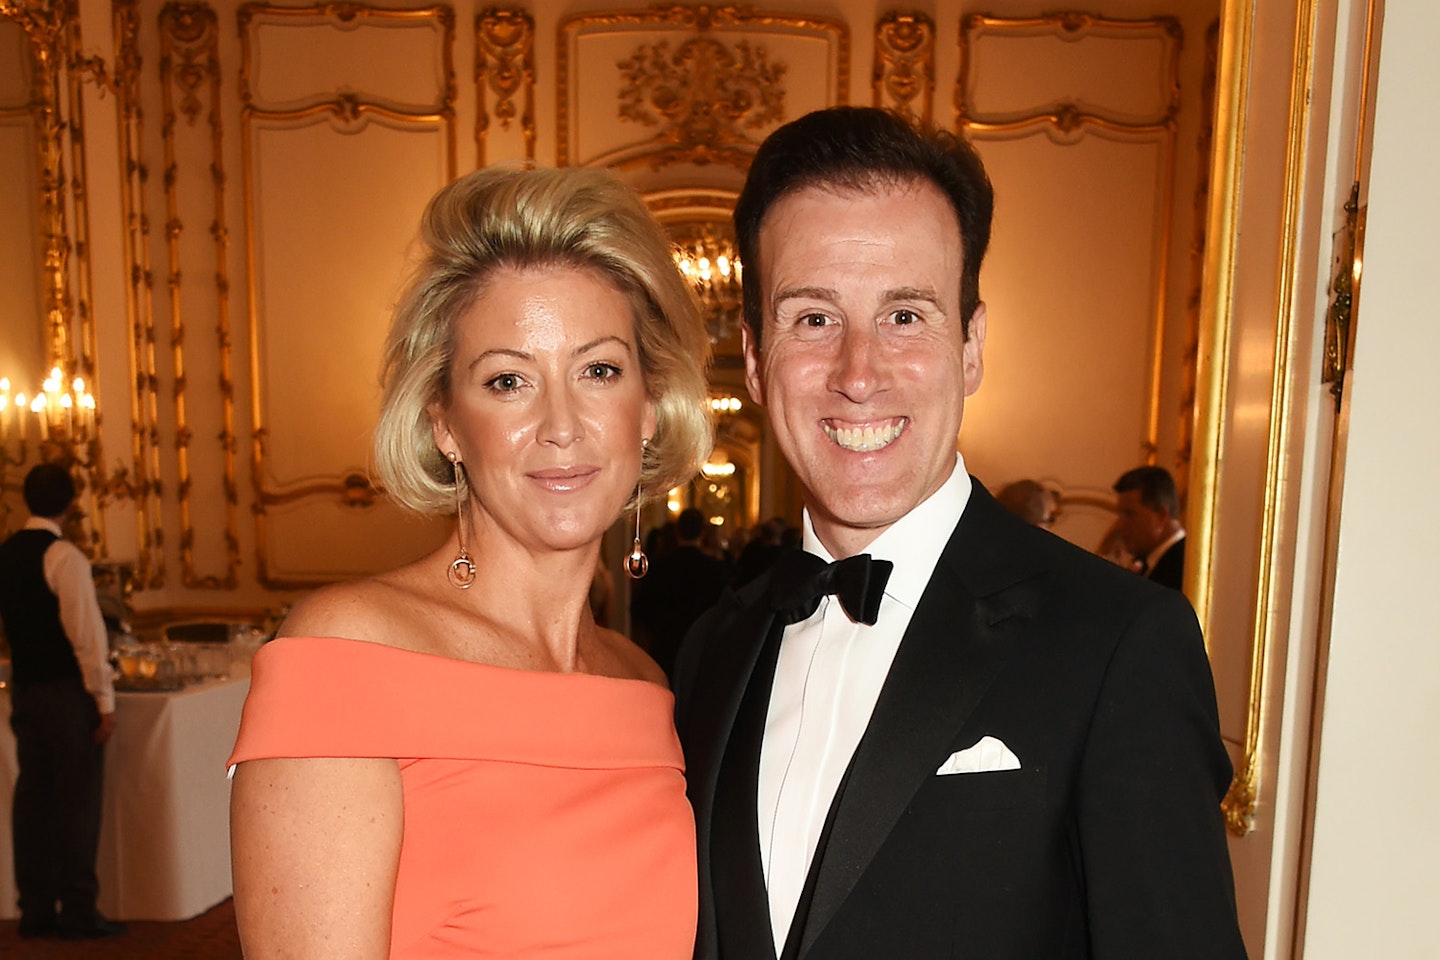 strictly-come-dancing-anton-du-beke-hannah-summers-given-birth-baby-twins